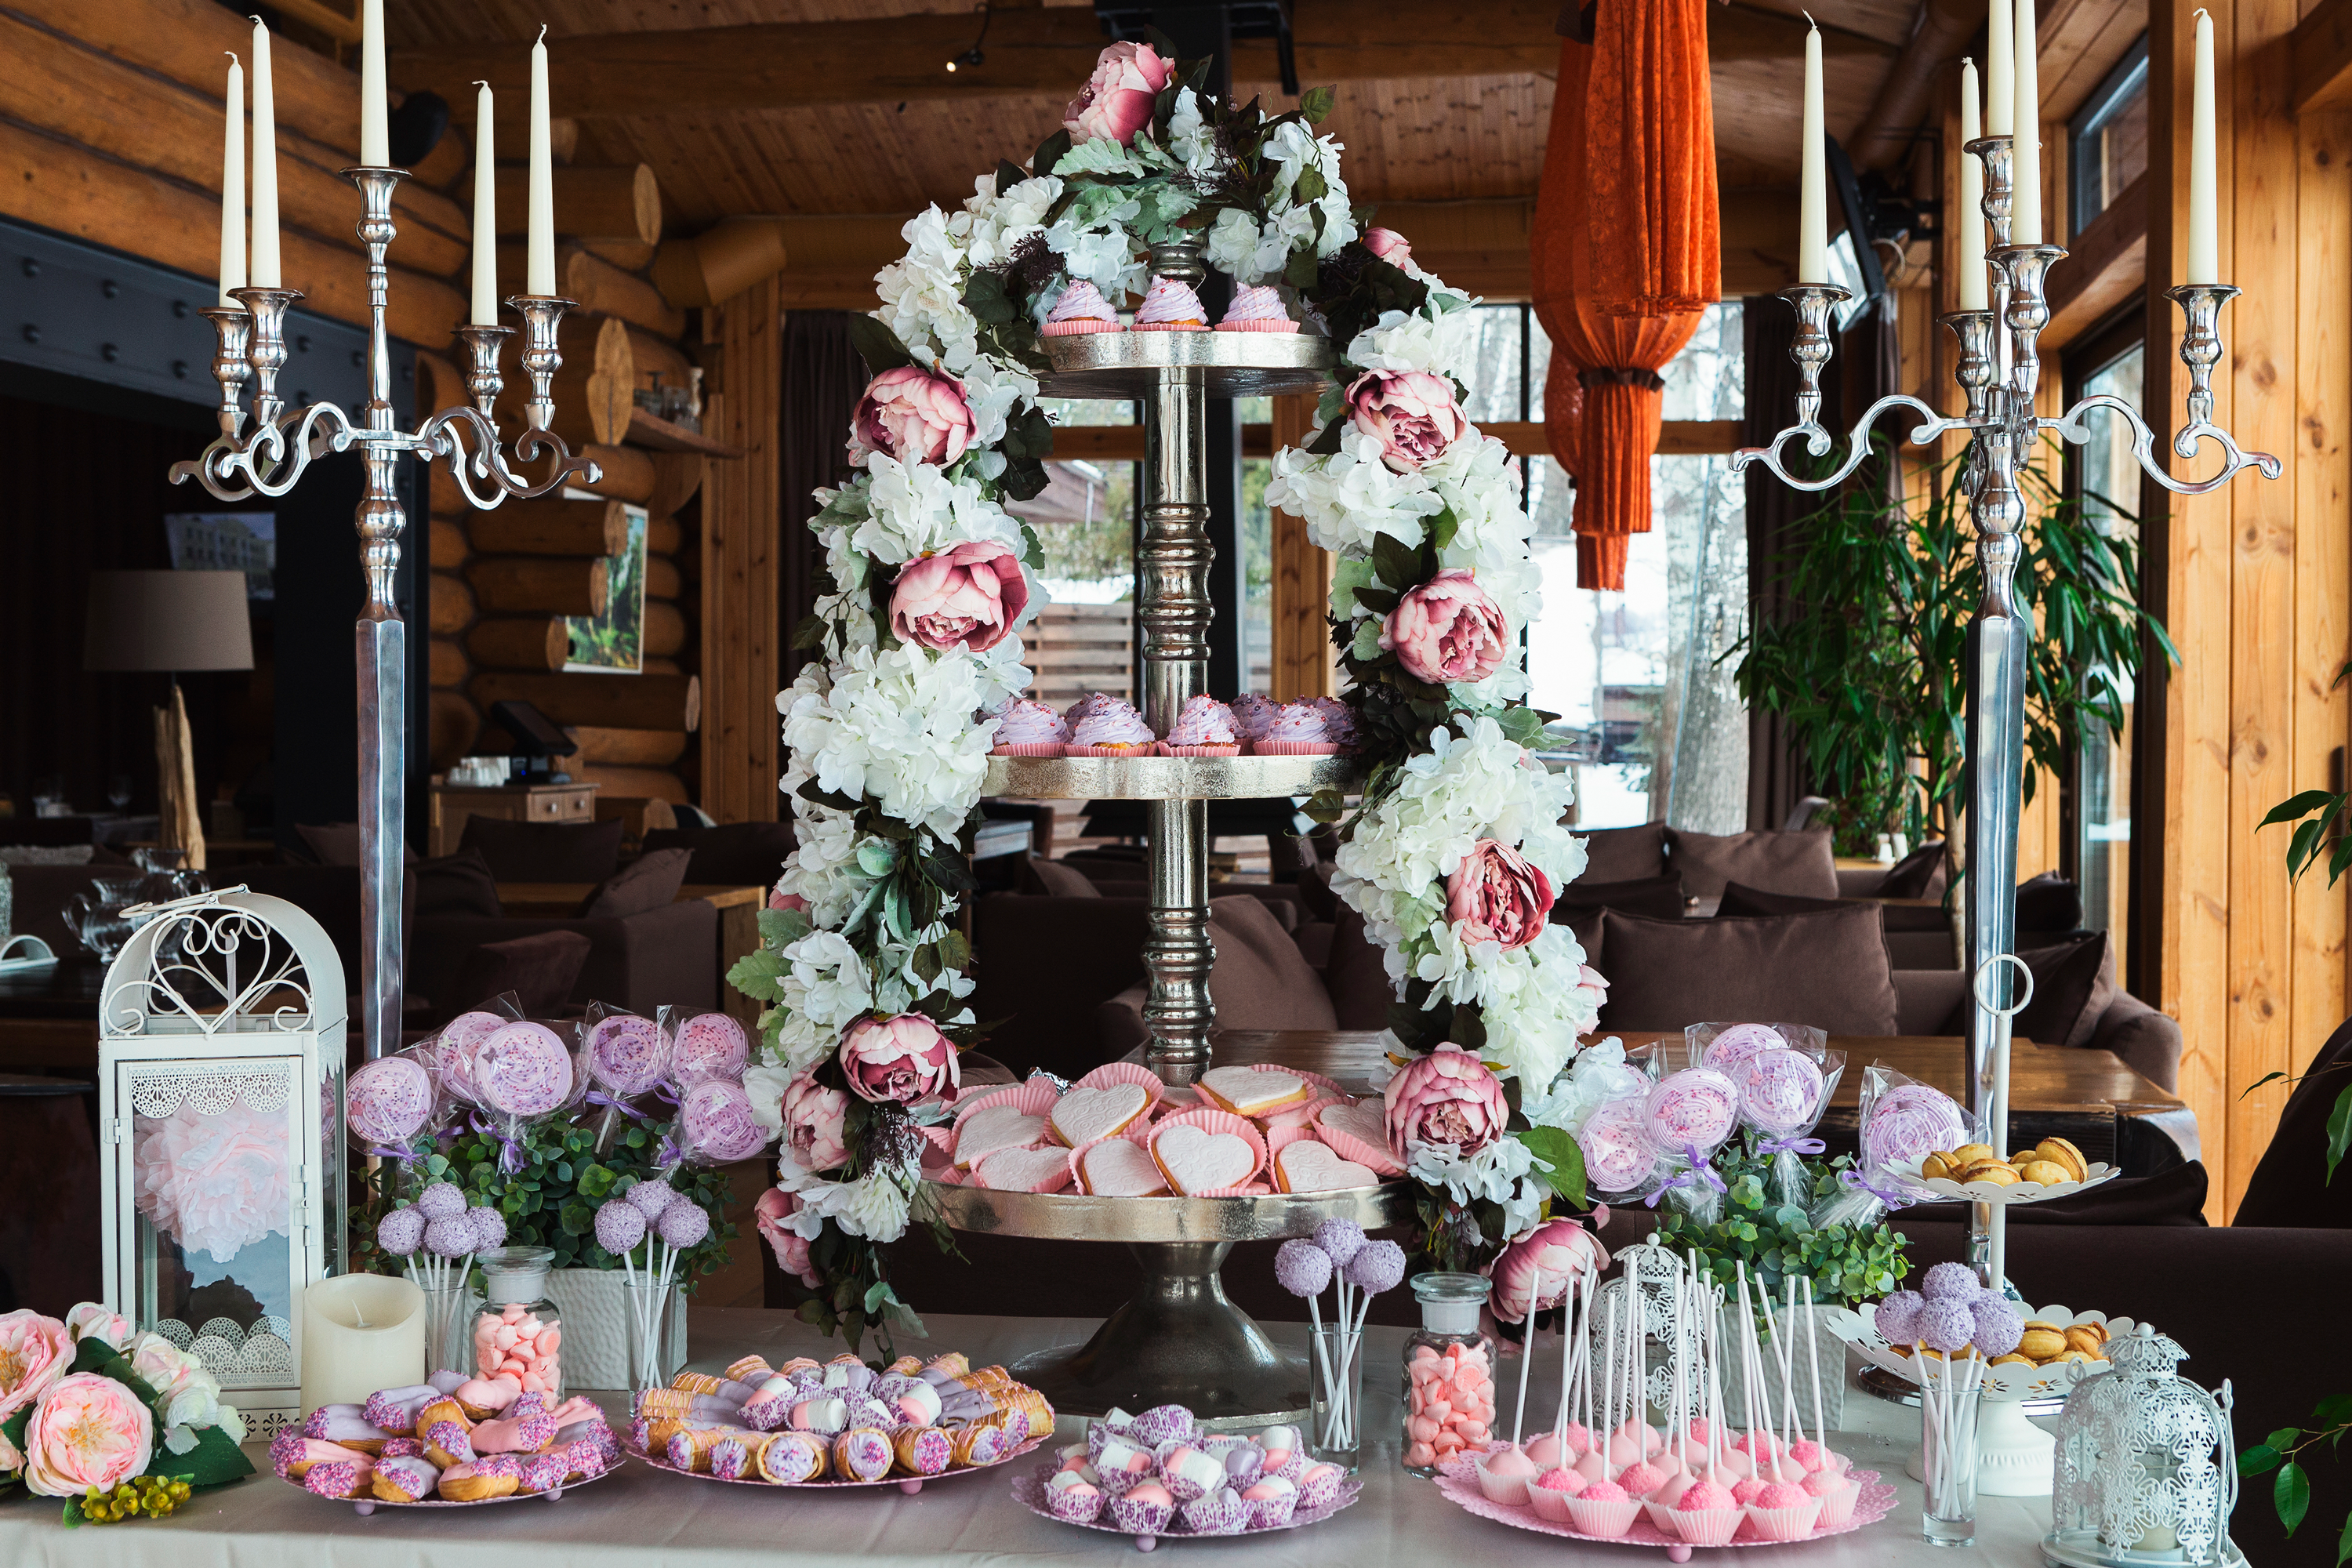 Candy Bouquets & Other Candy Wedding Ideas